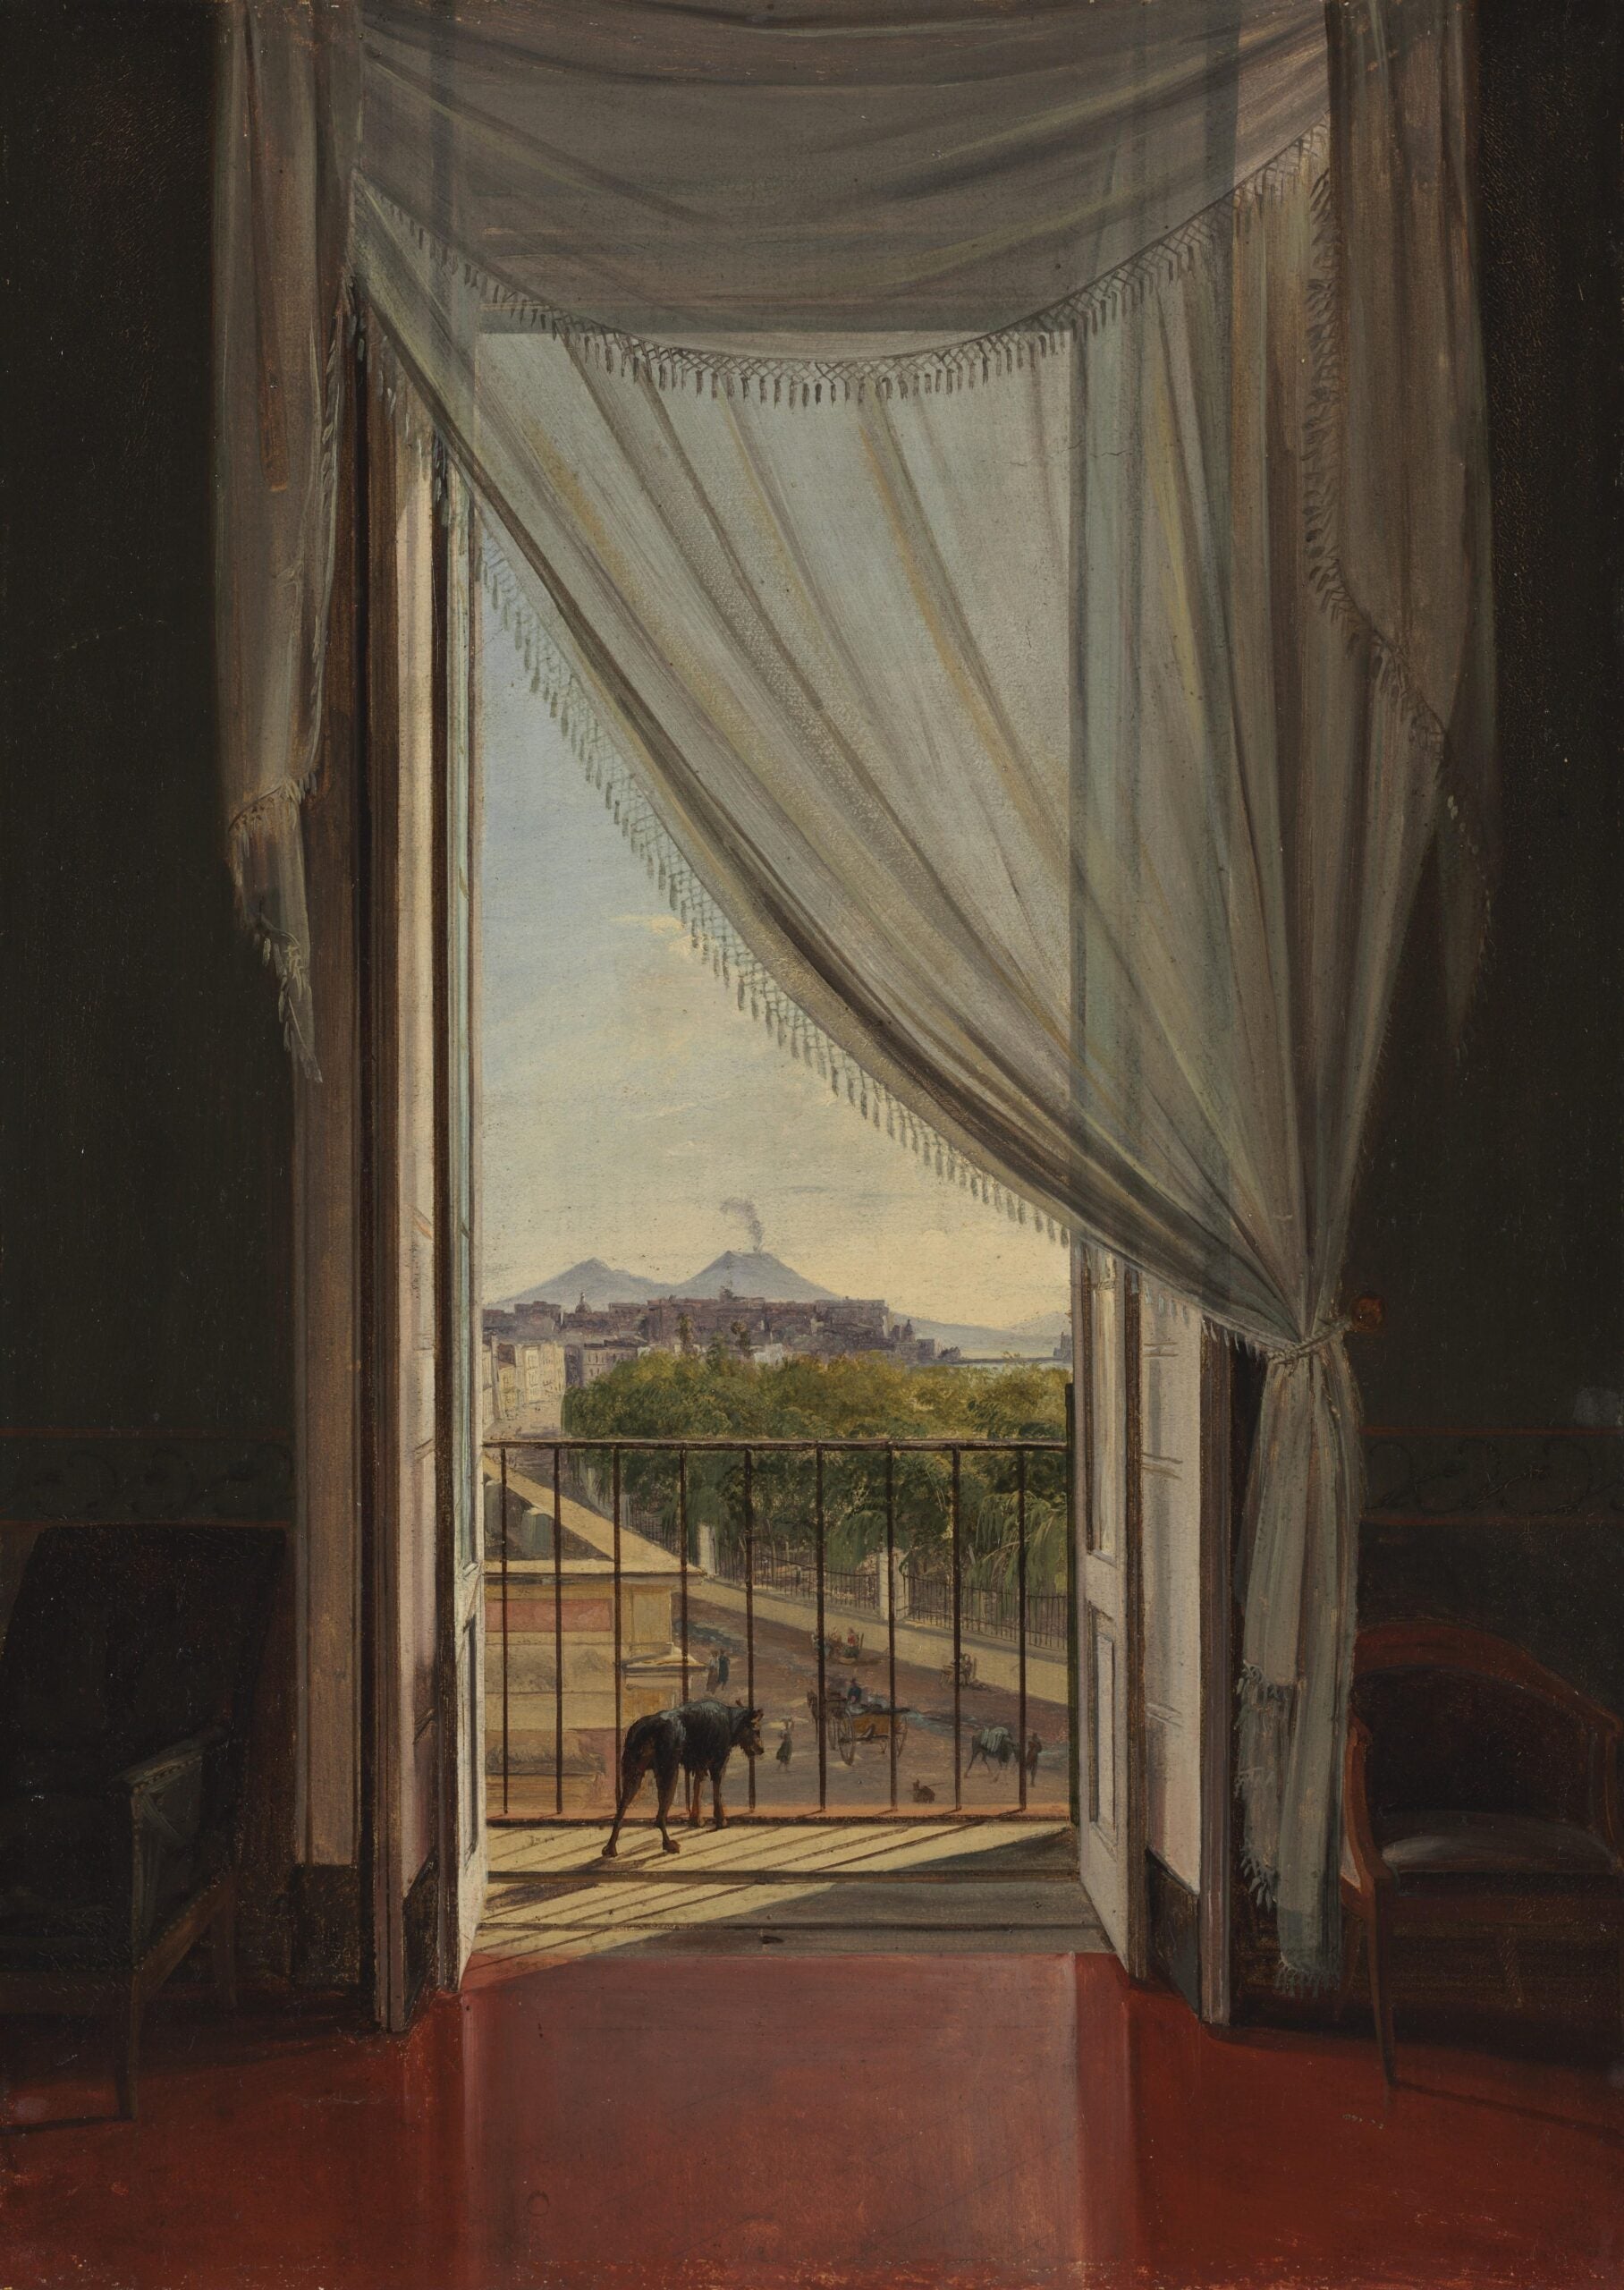 Franz Ludwig Catel (German, 1778-1856). A View of Naples through a Window. 1824. Oil on paper, mounted on canvas, 59.5 x 46 x 5.5 cm. The Cleveland Museum of Art.